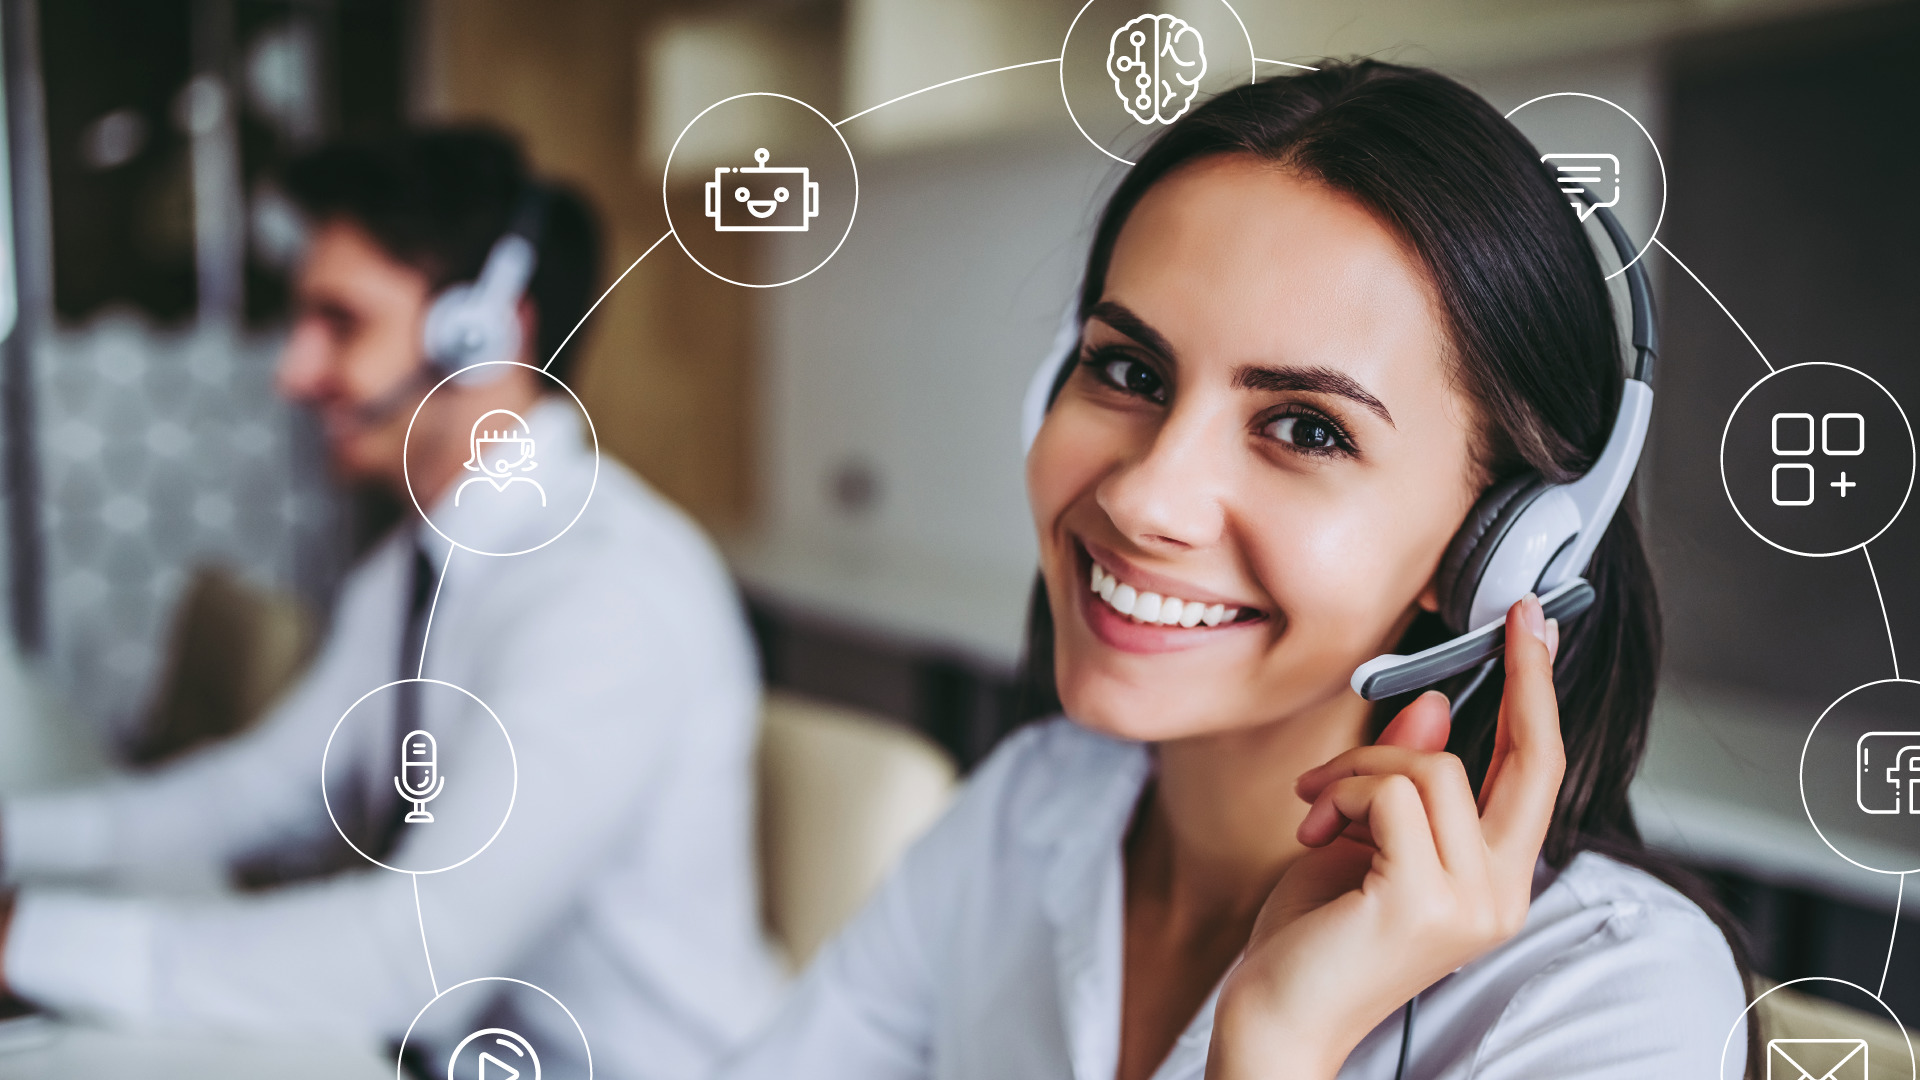 How To Maximize Omnichannel Customer Service